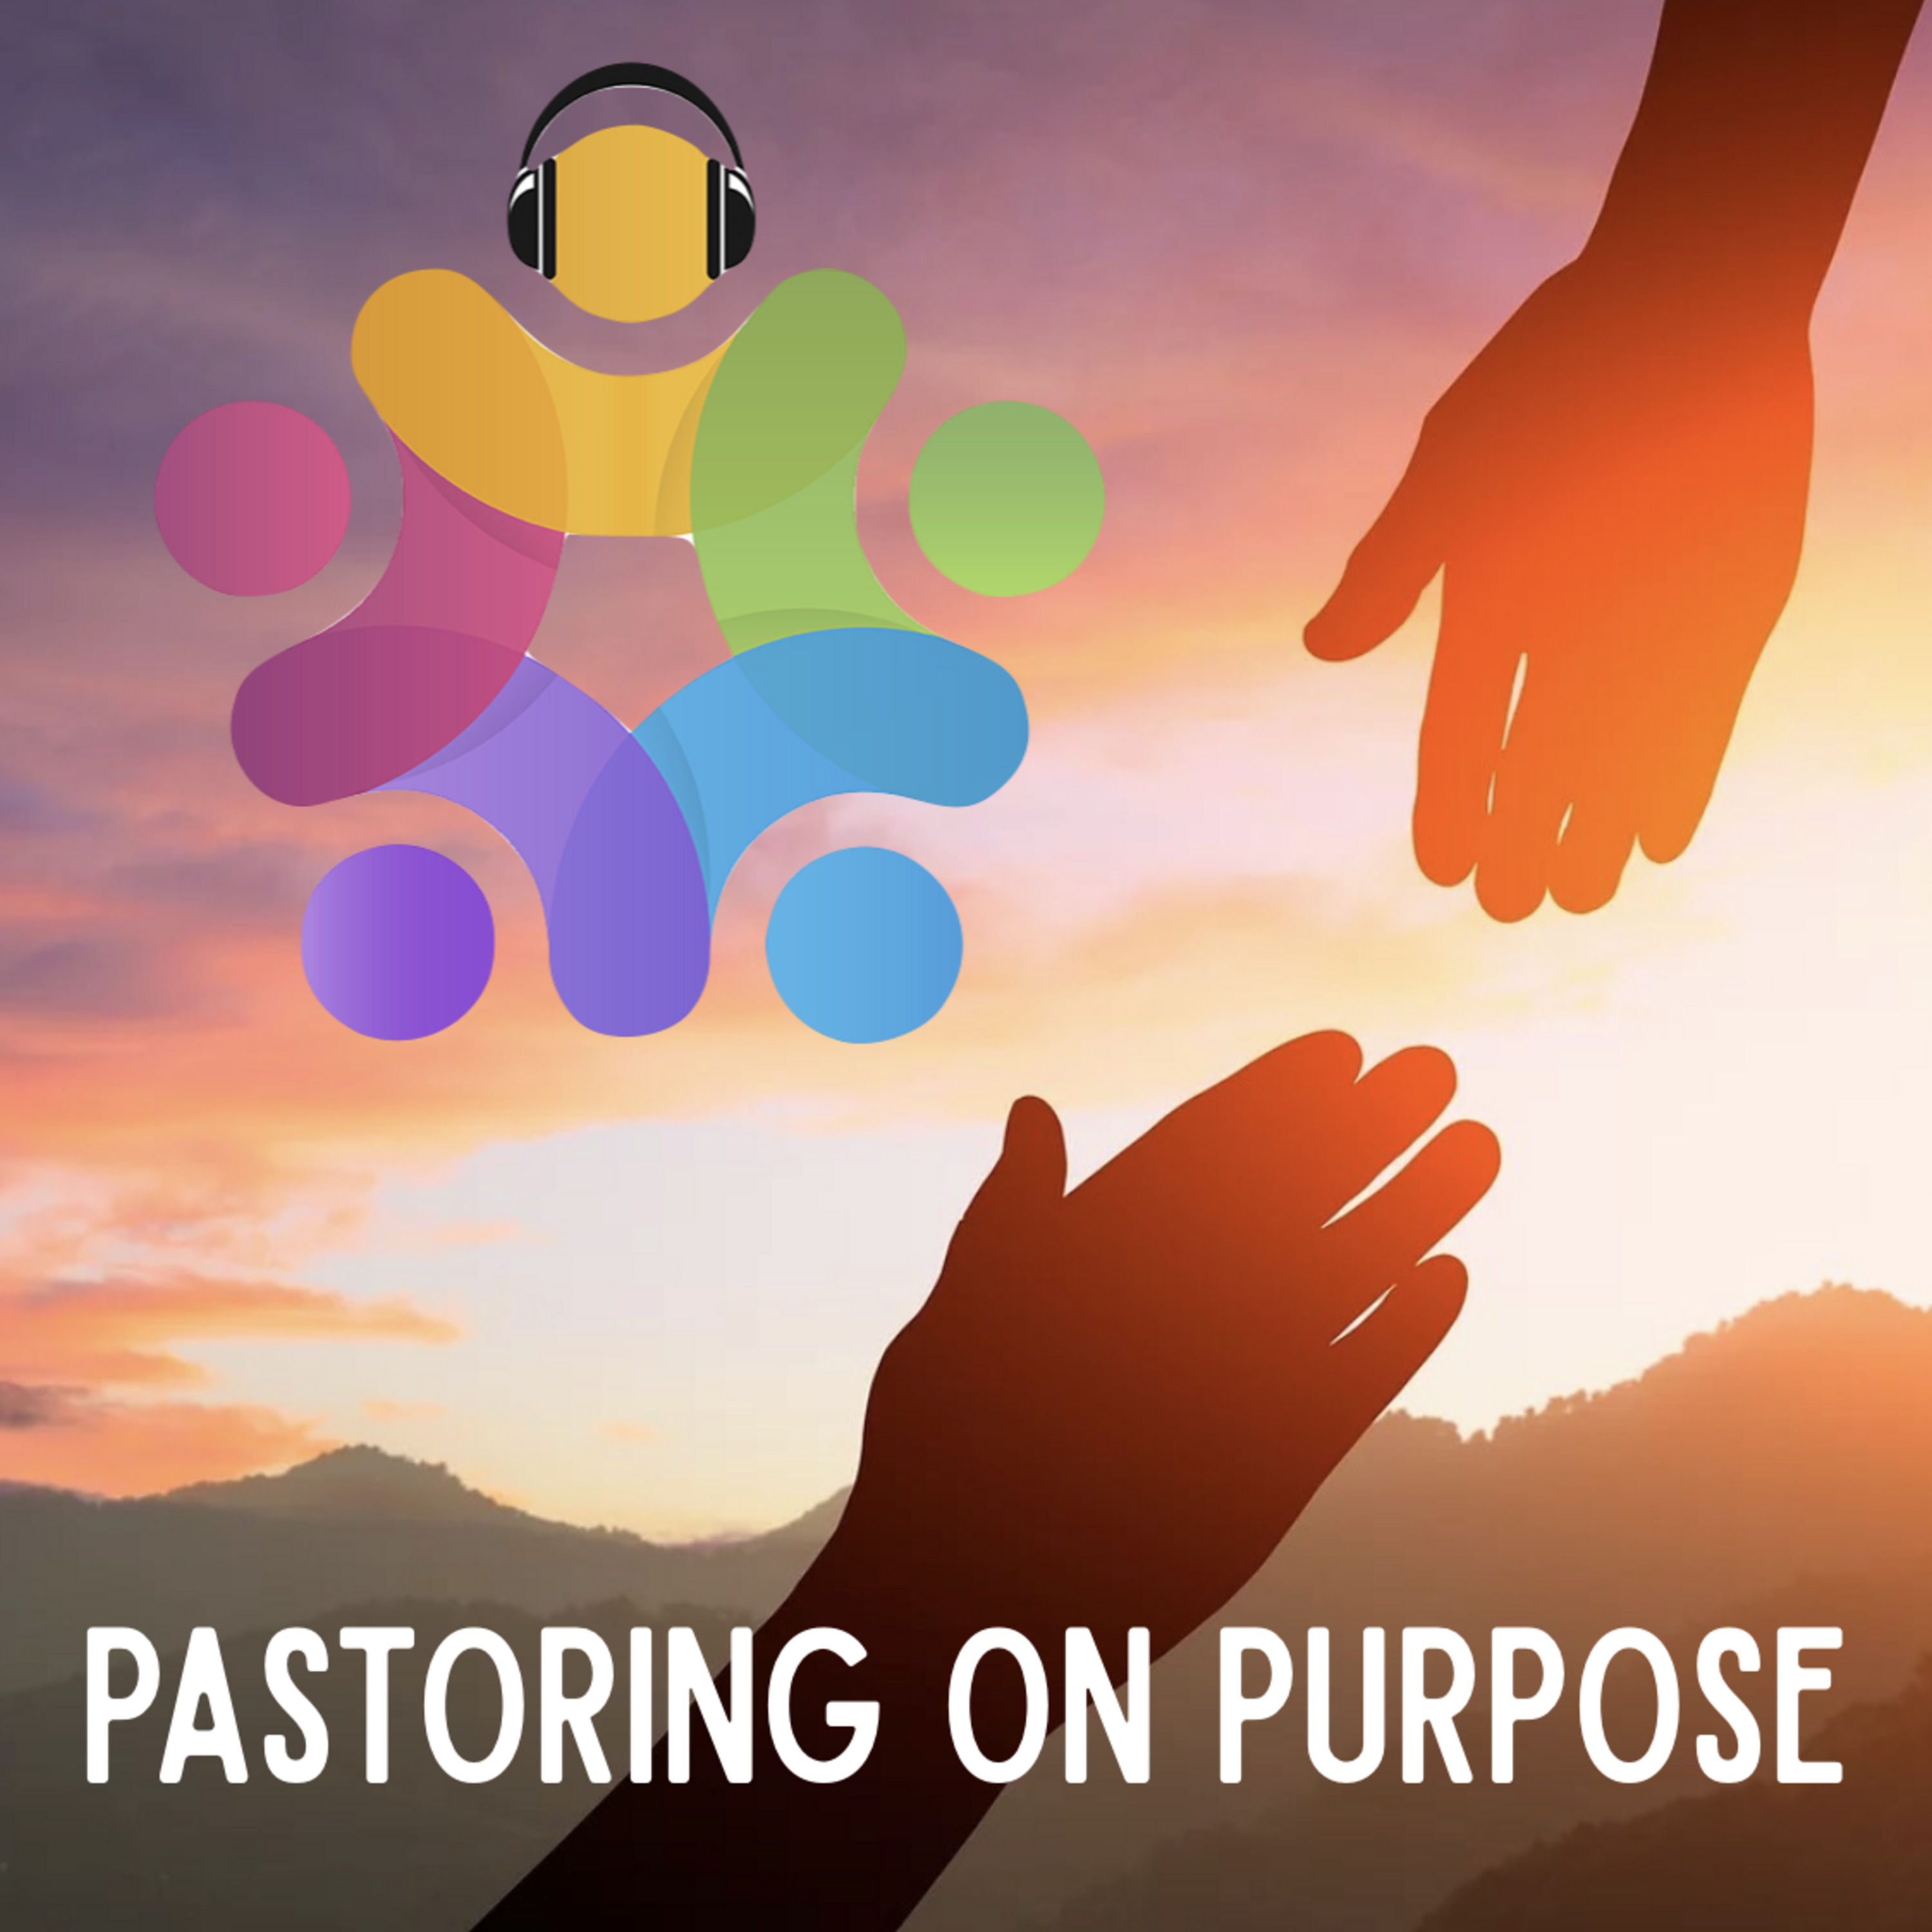 Season 5 Episode 2: Jeff Sargent and the Birth of Pastoring on Purpose